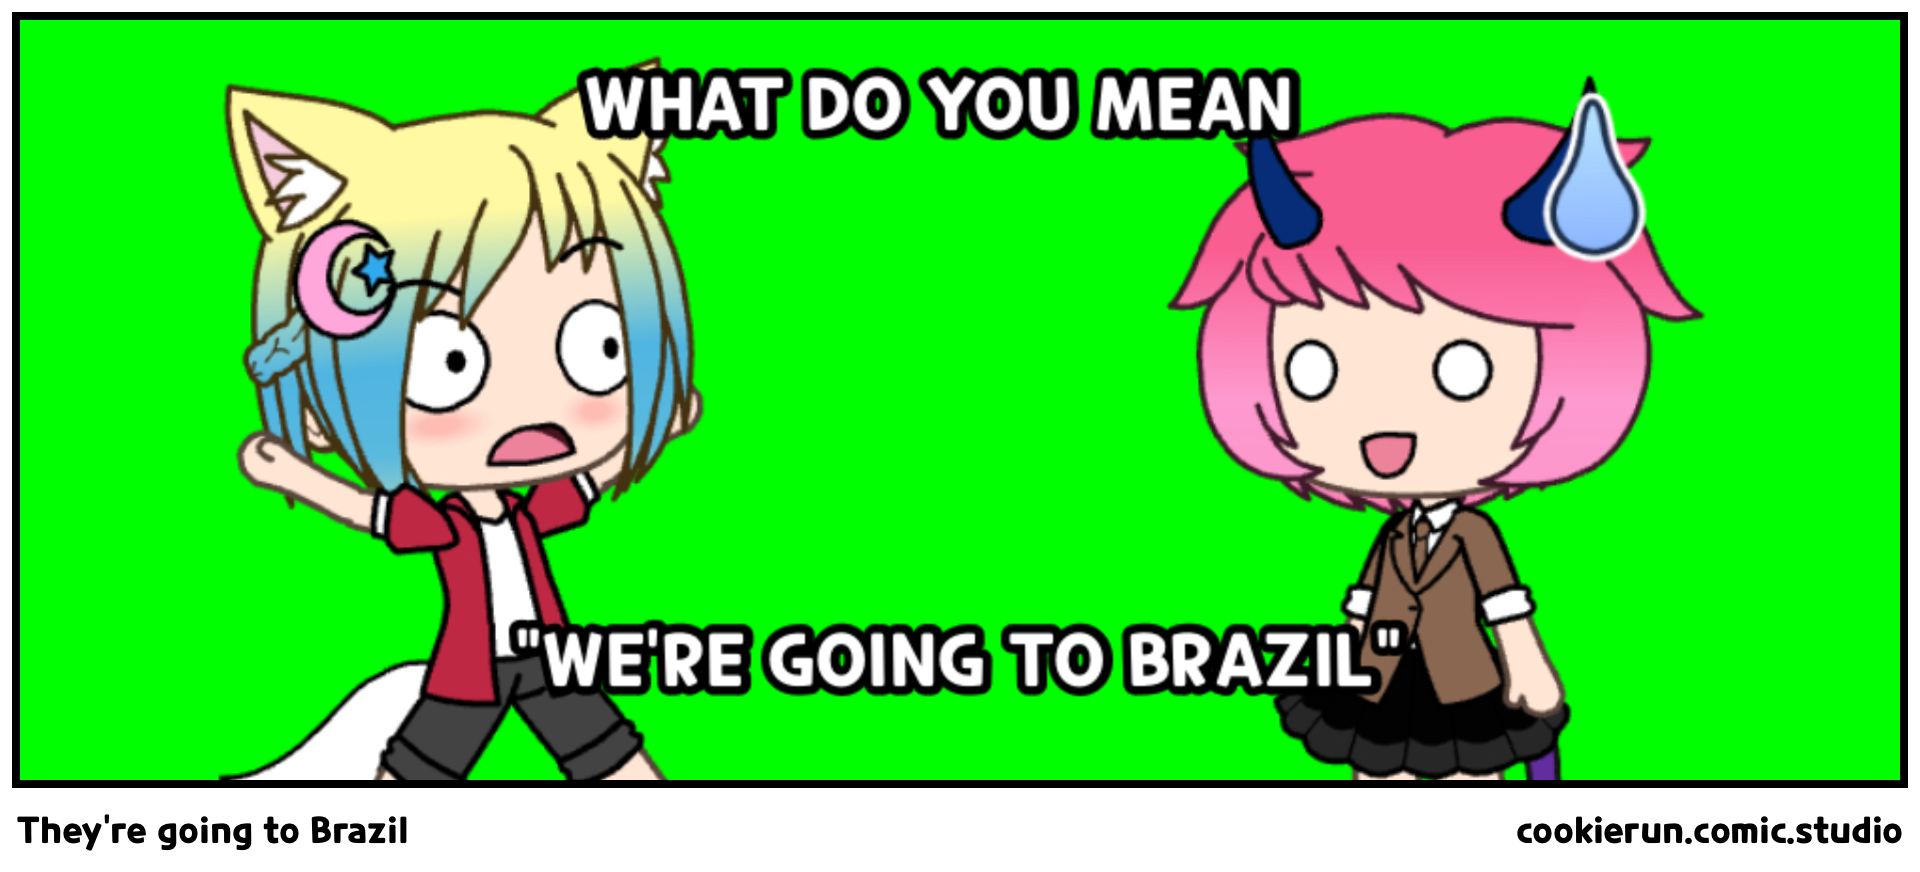 They’re going to Brazil